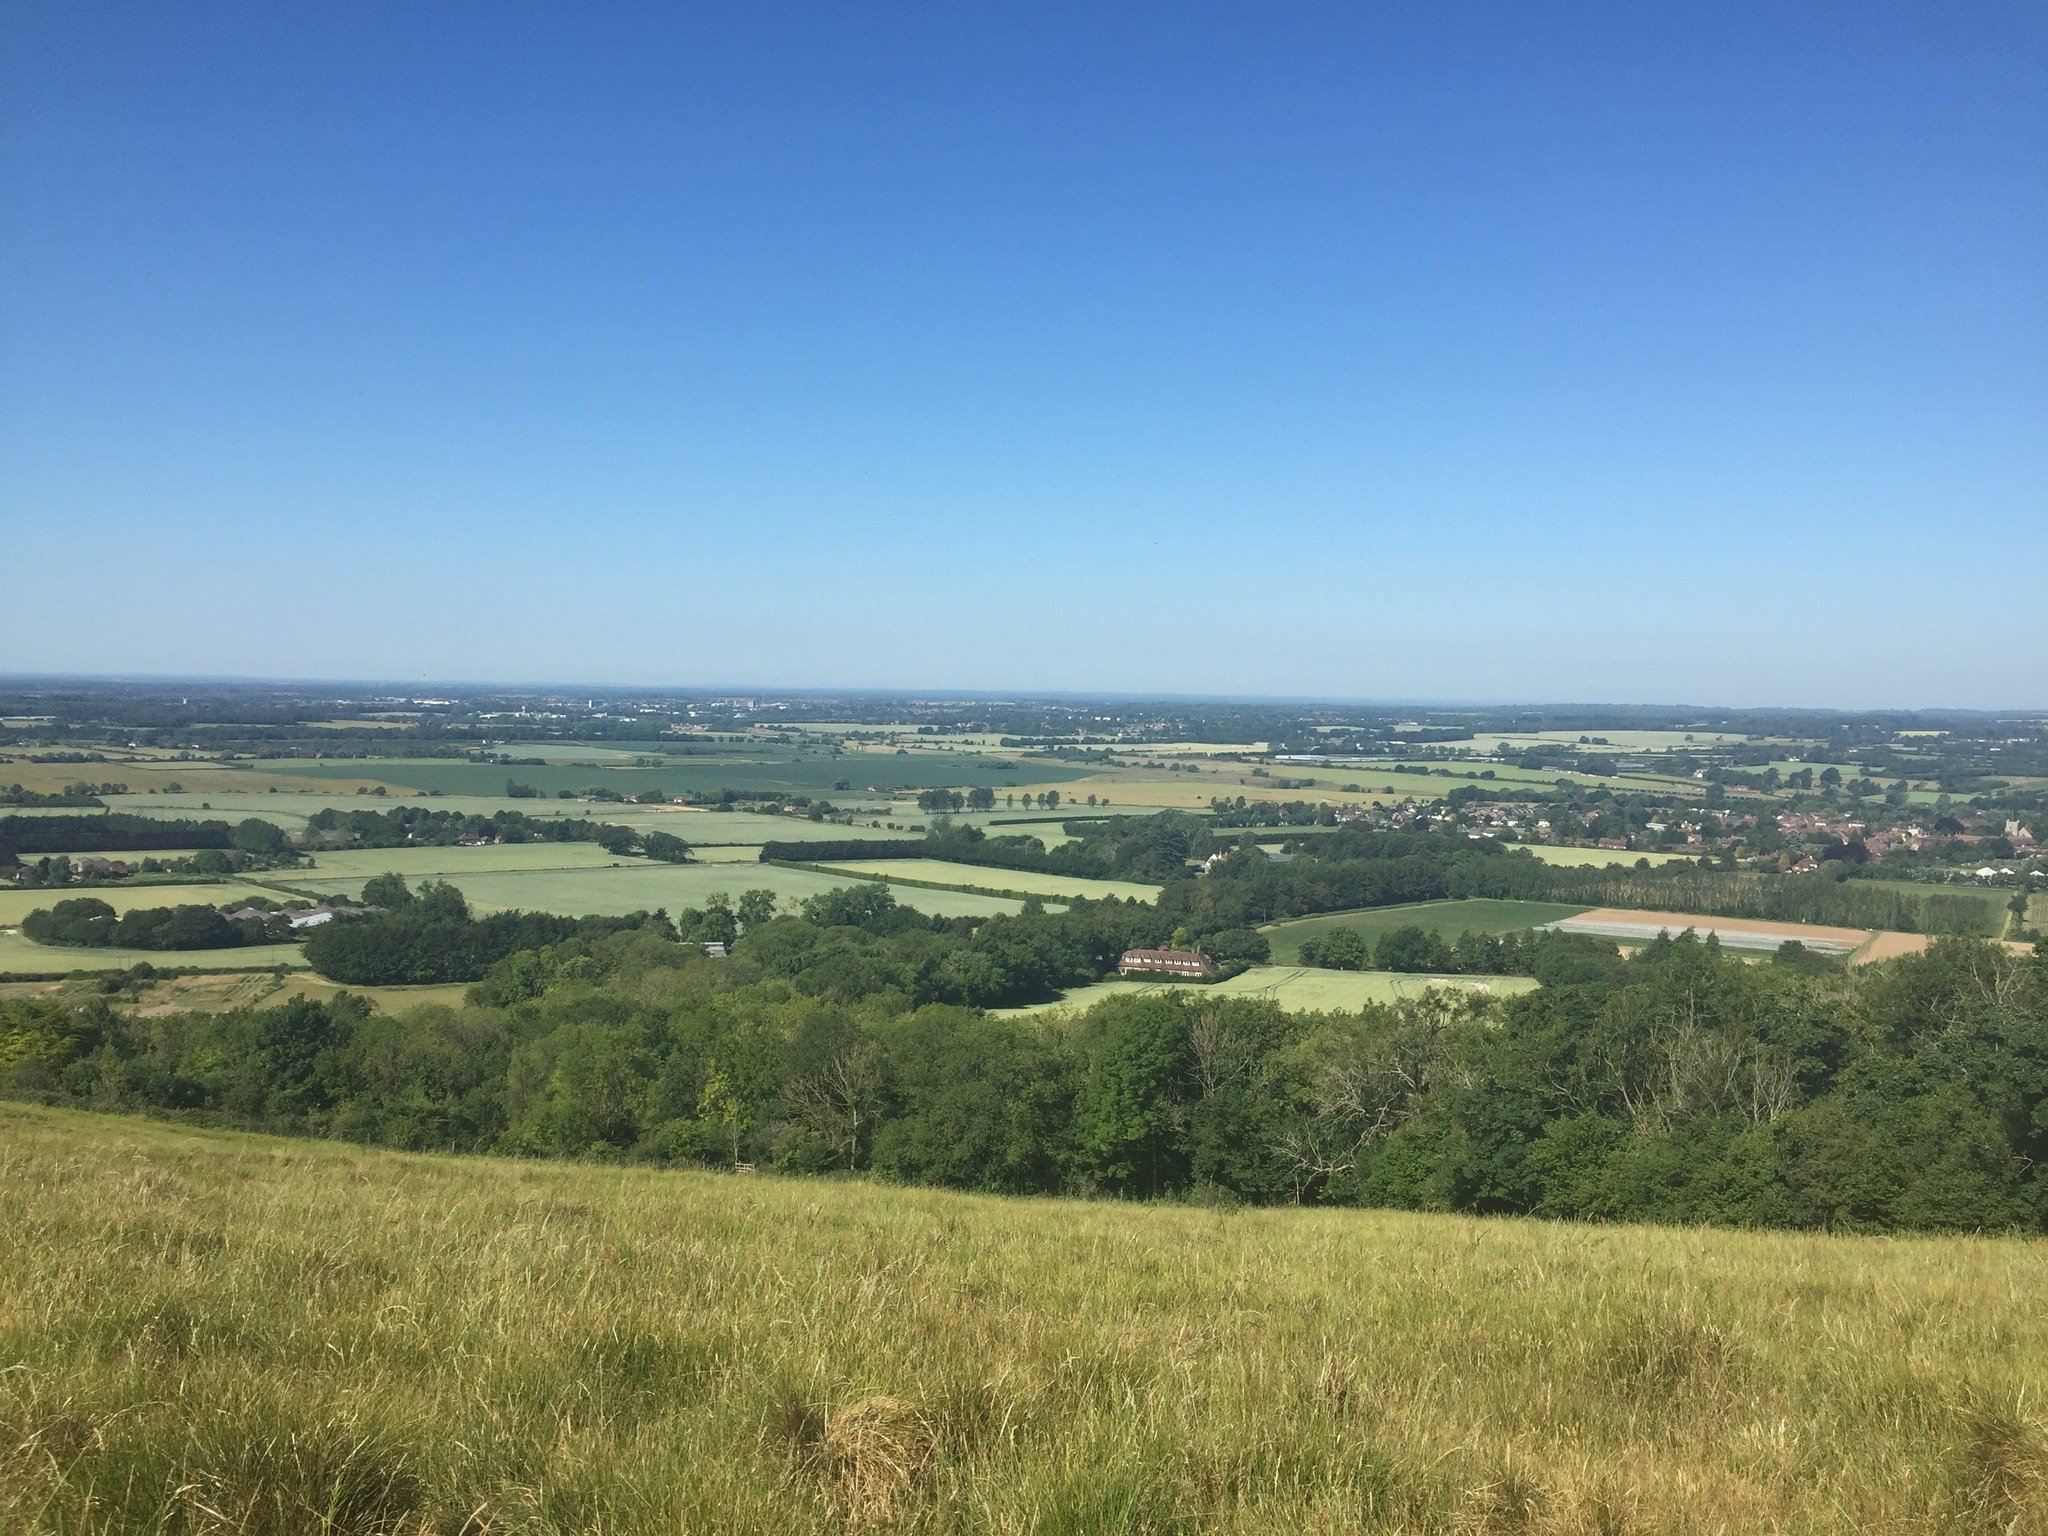 Did you know that May is National Walking Month? With the weather set to improve it's the perfect time to get out and enjoy the beautiful countryside around us!

&quot;Ashford&rsquo;s rich landscape is a walker&rsquo;s paradise; here routes range fro